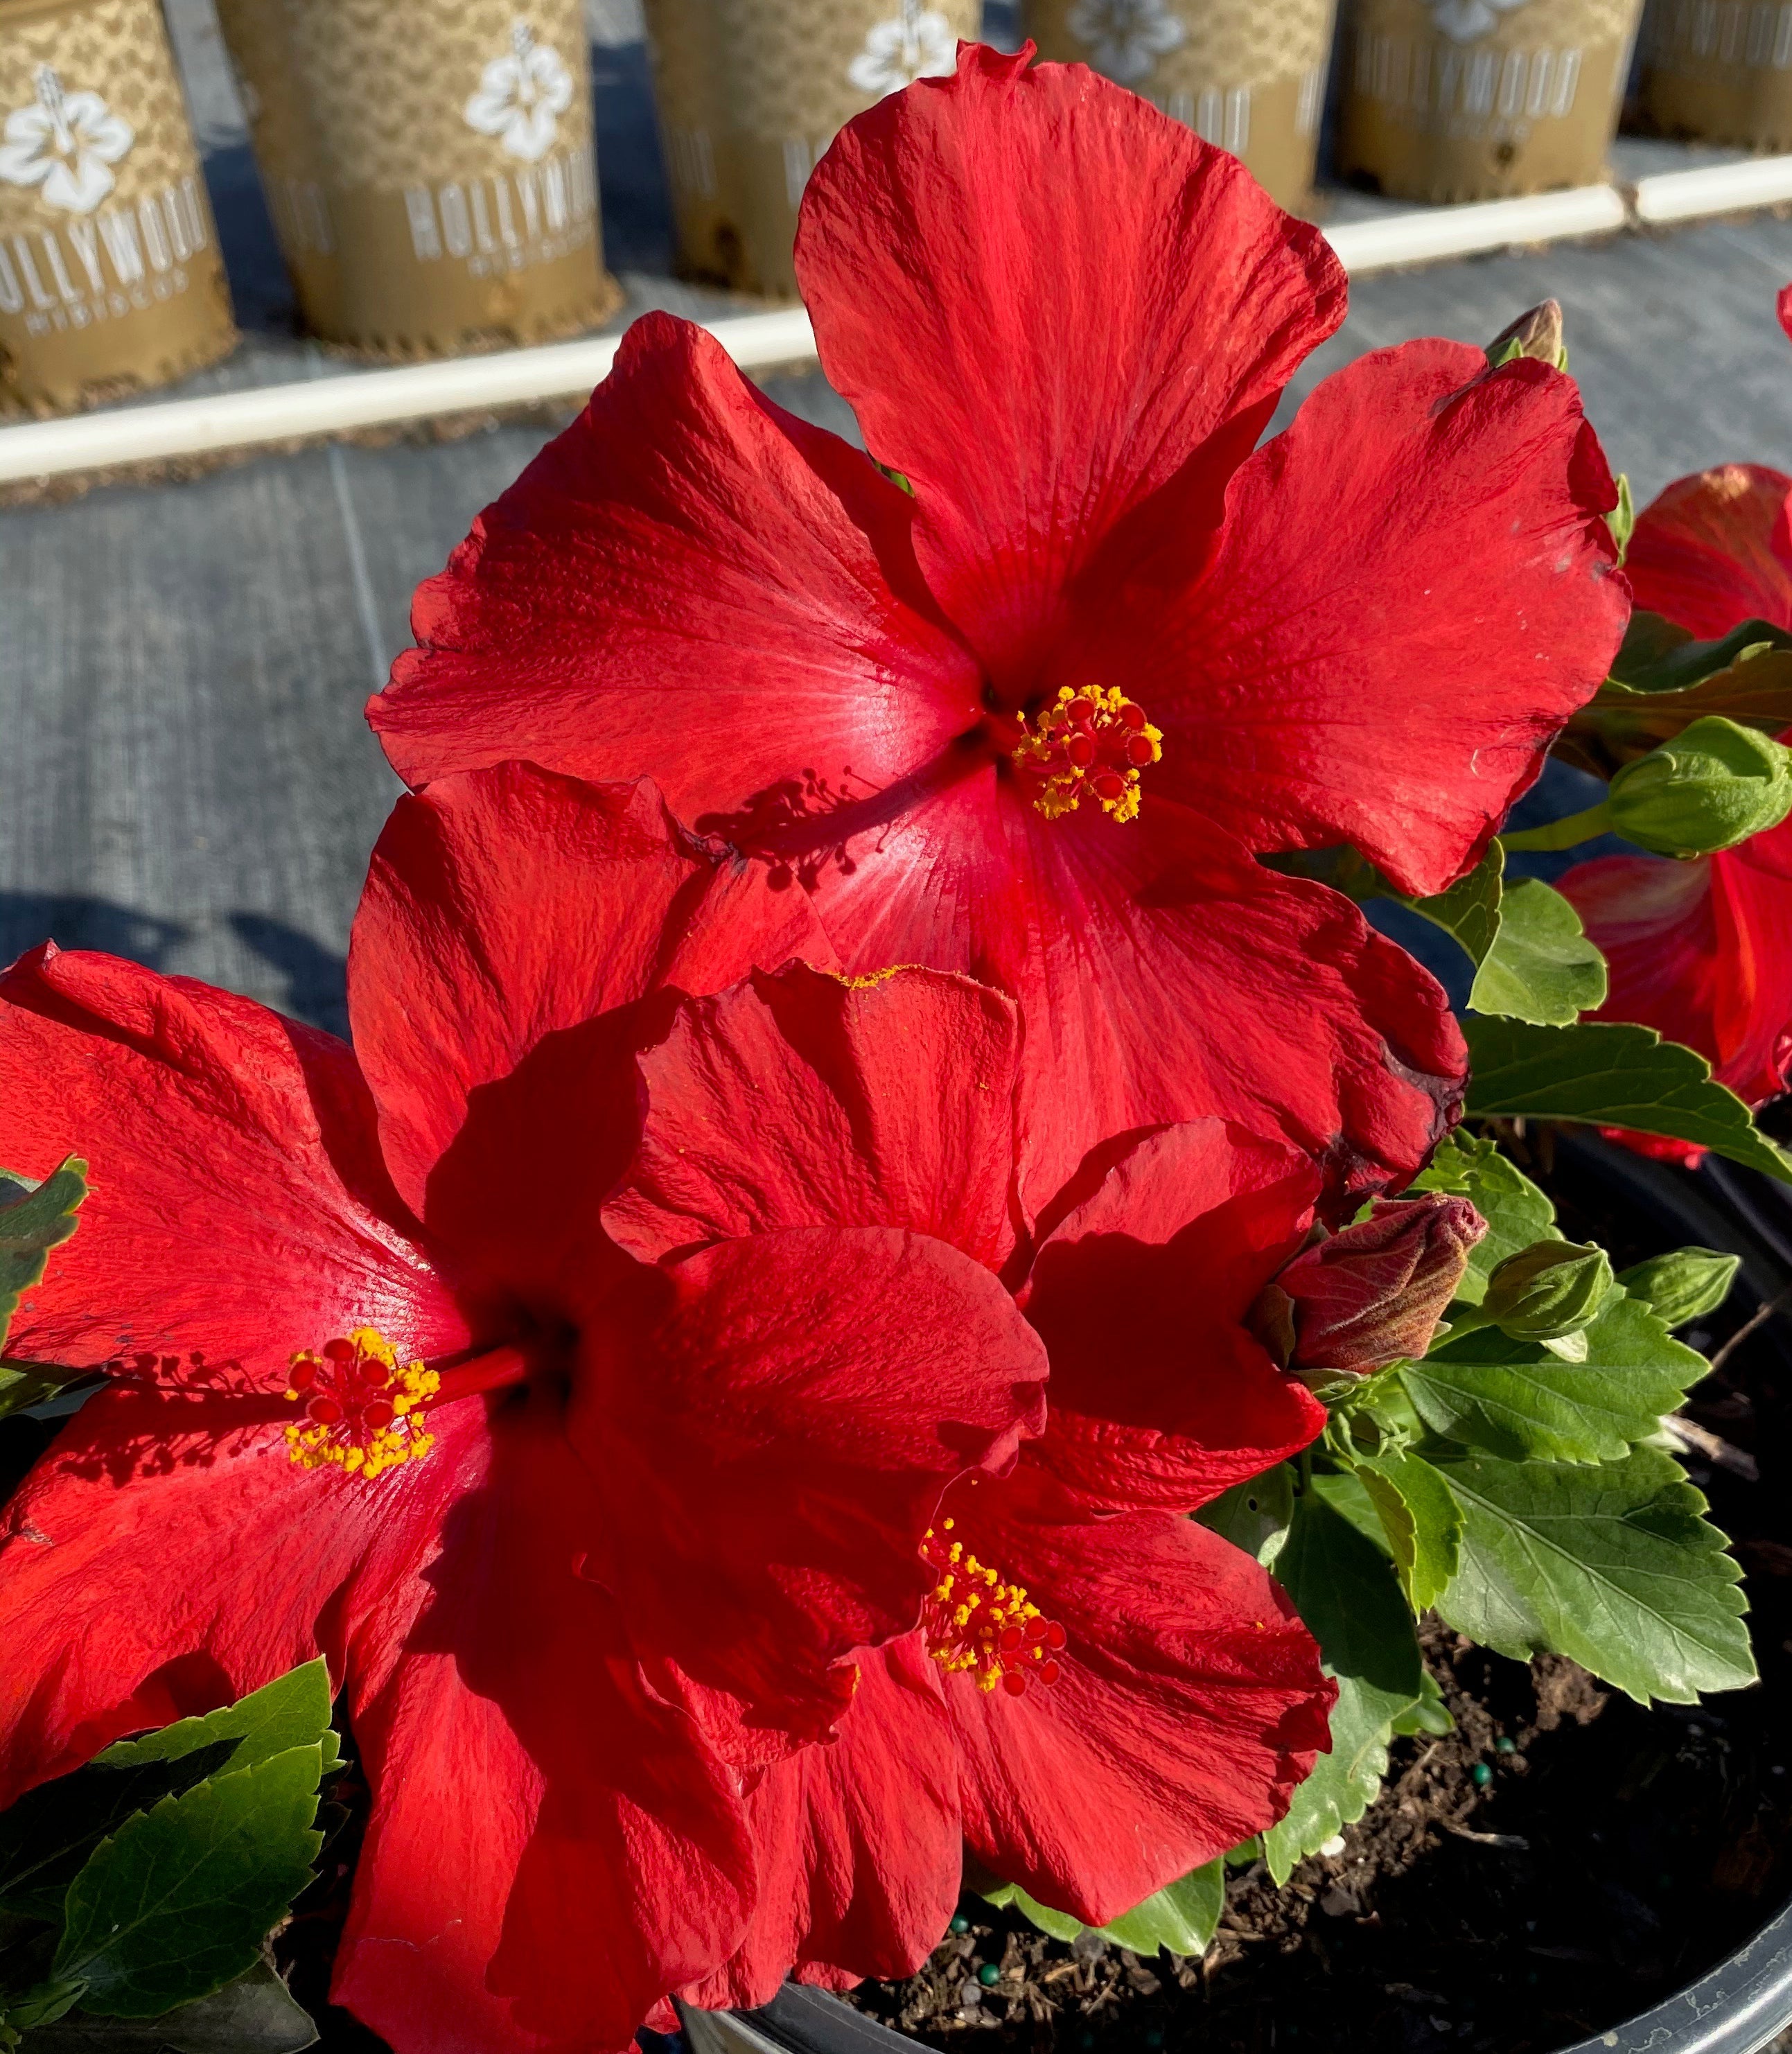 First to Arrive™ - Hollywood® Hibiscus - 1 Gallon